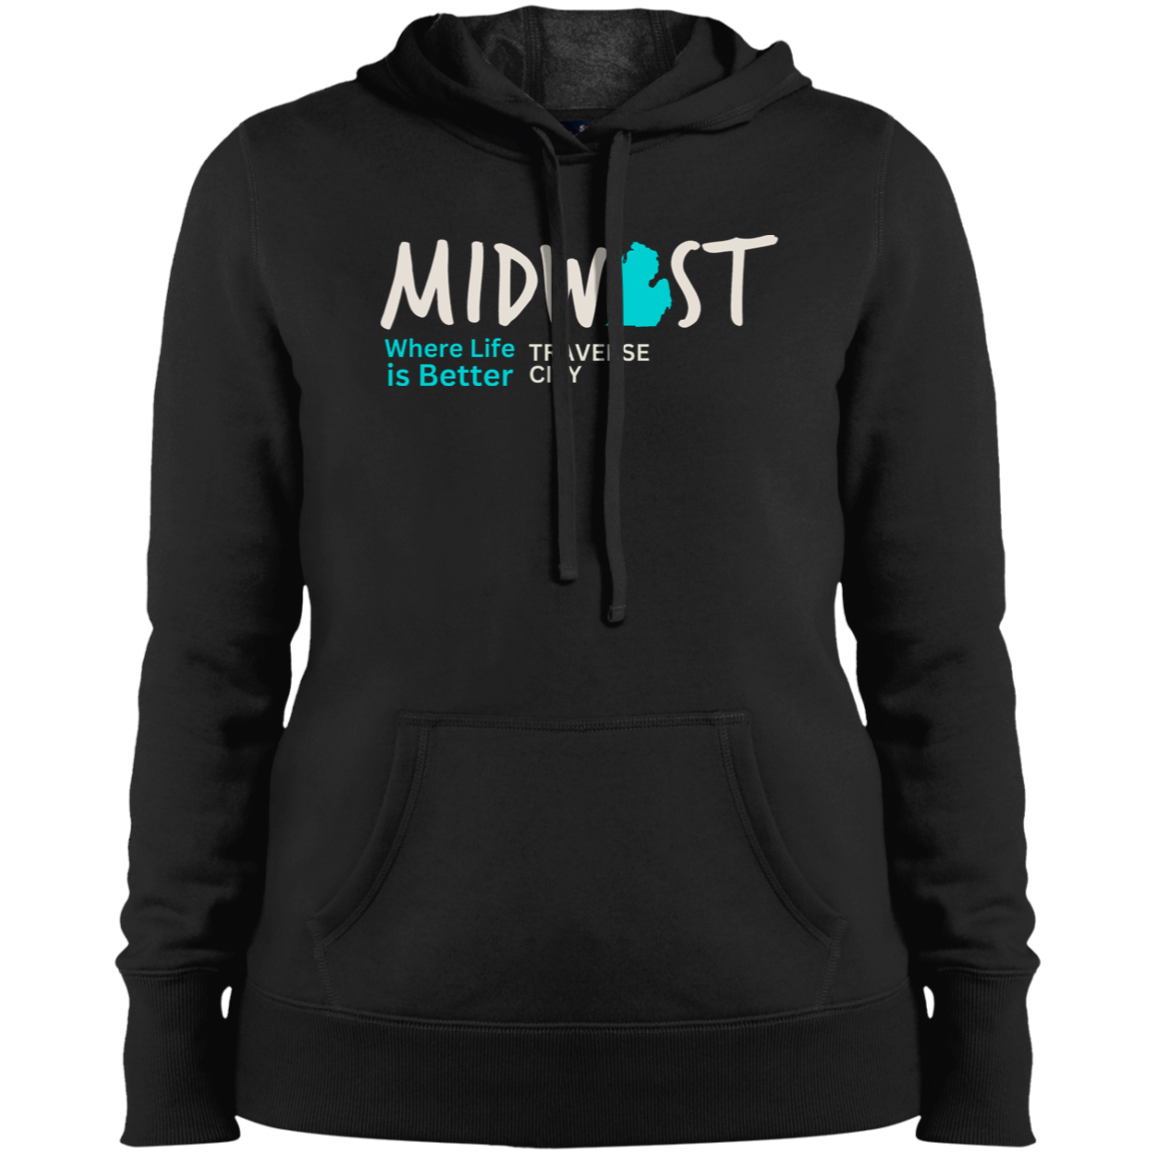 Midwest Where Life is Better Traverse City Ladies' Hoodie